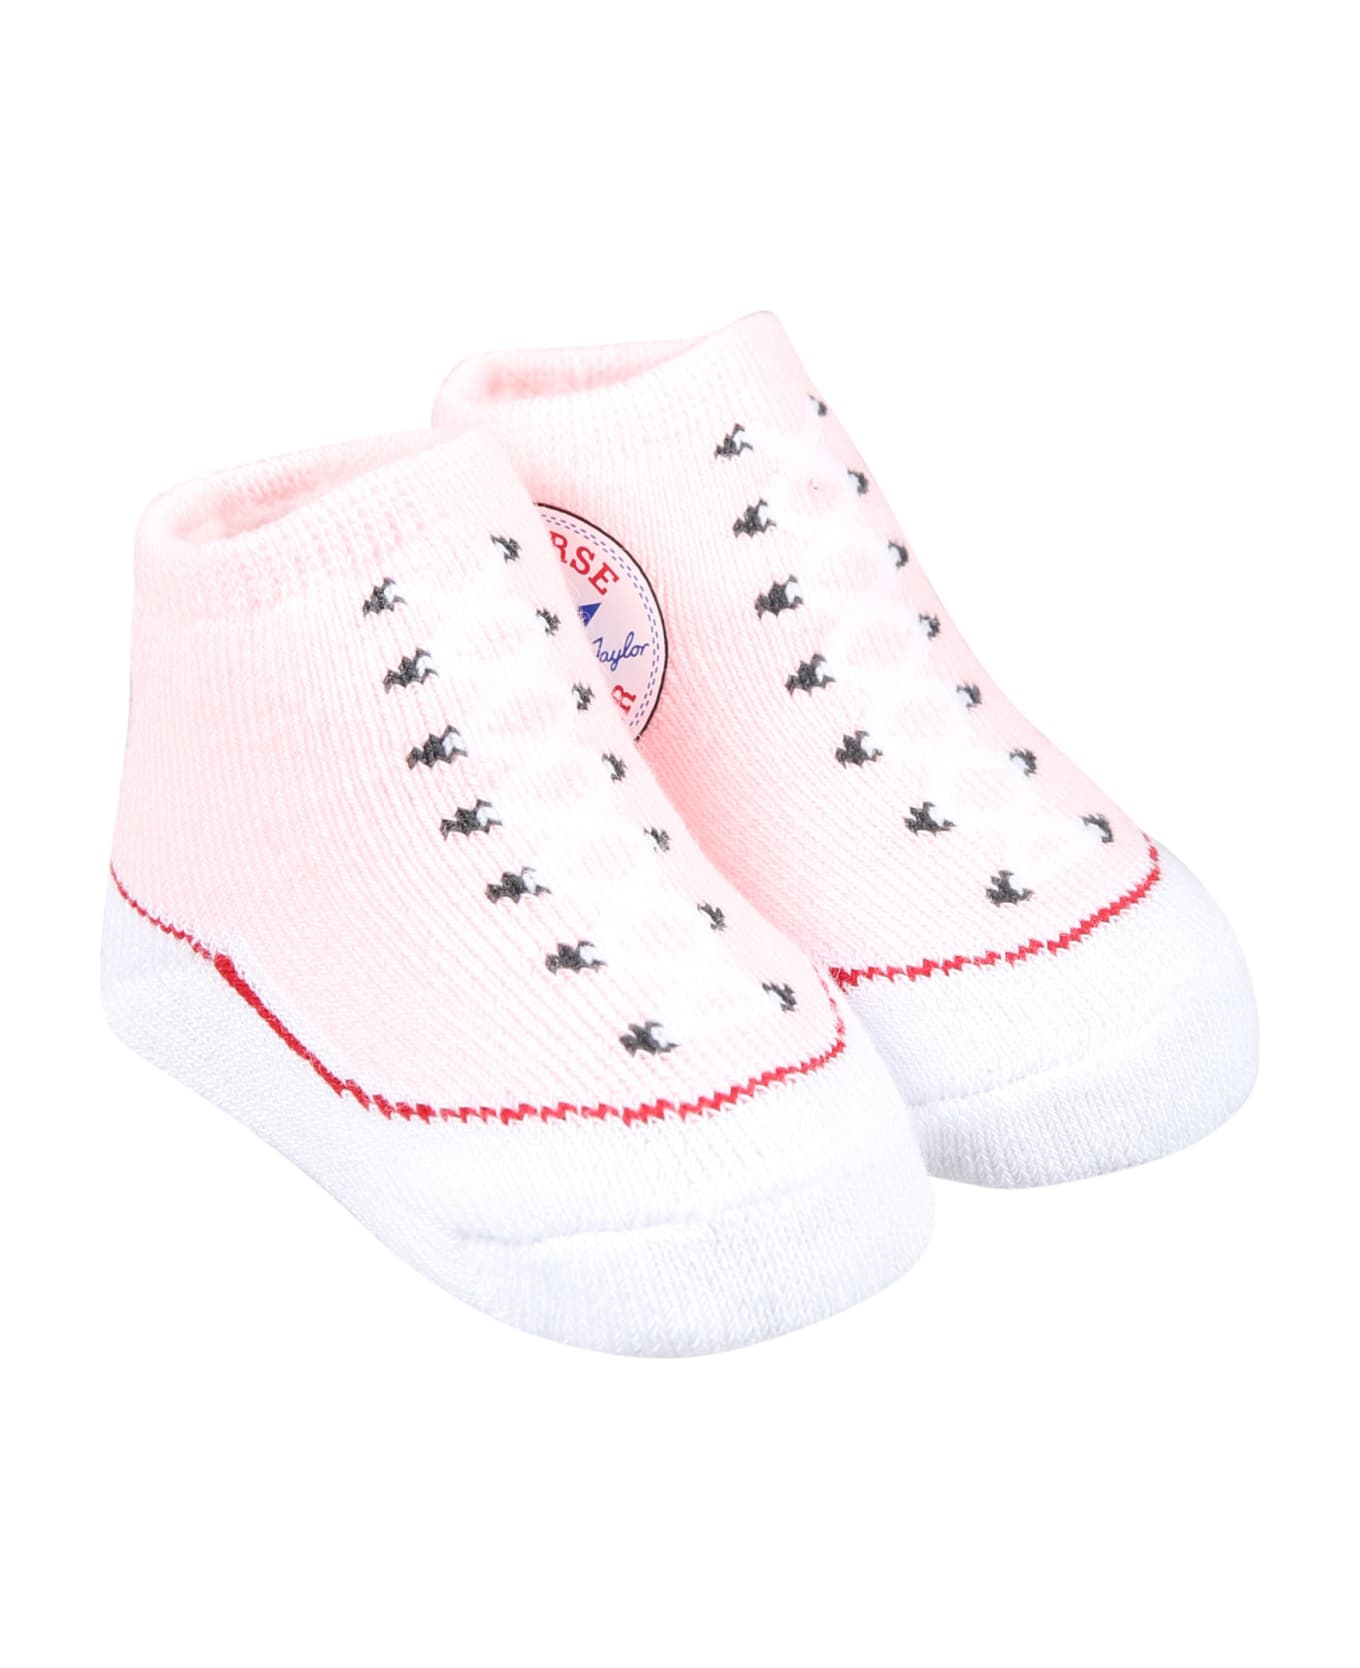 Converse Set Of Multicolor Infant Booties For Baby Girl - Multicolor